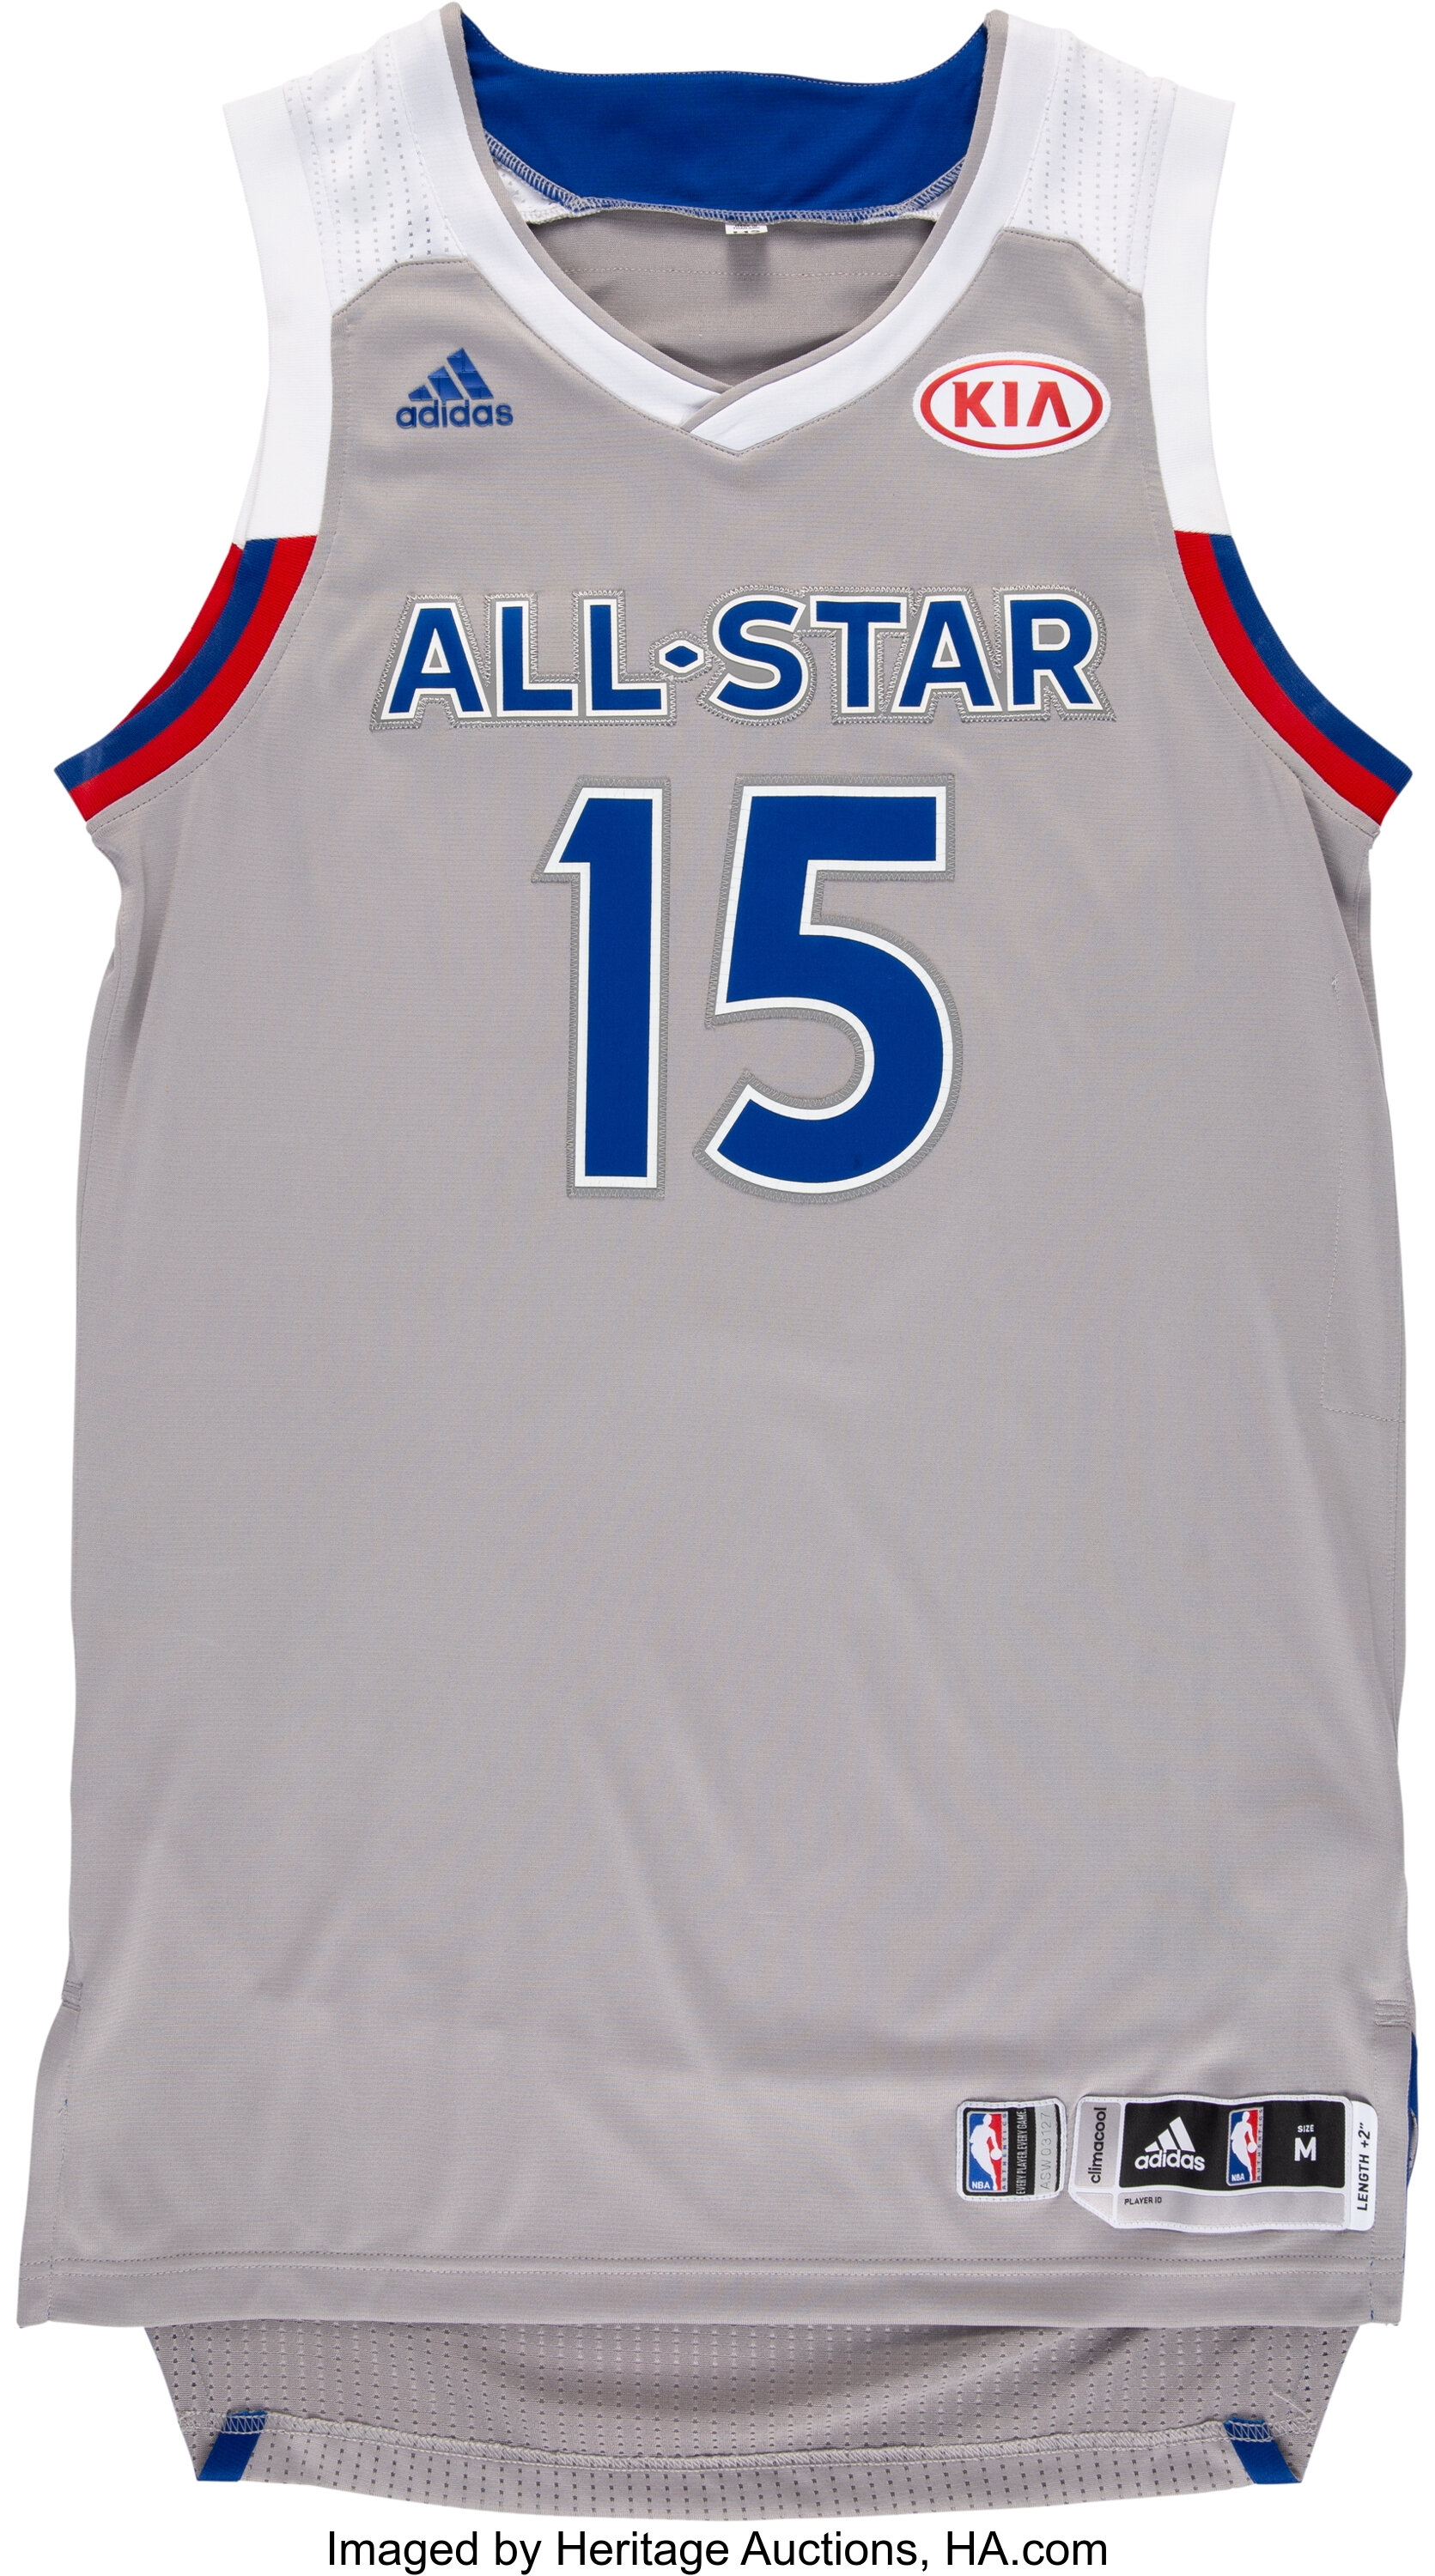 2017 Kemba Walker Game Worn All-Star Game Jersey & Shorts with NBA, Lot  #56974